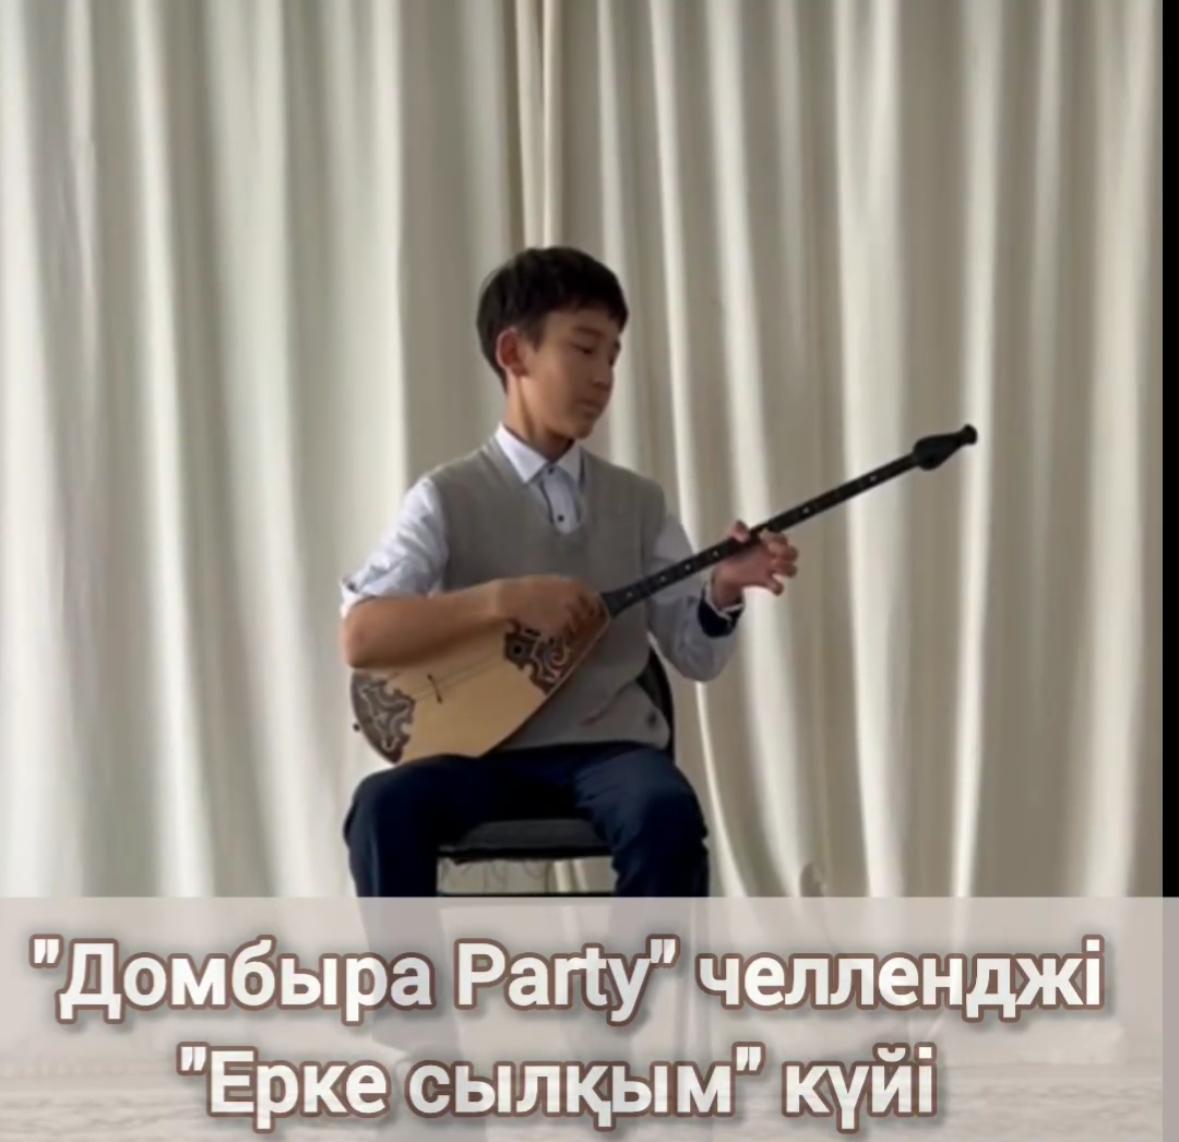 "Домбыра party"